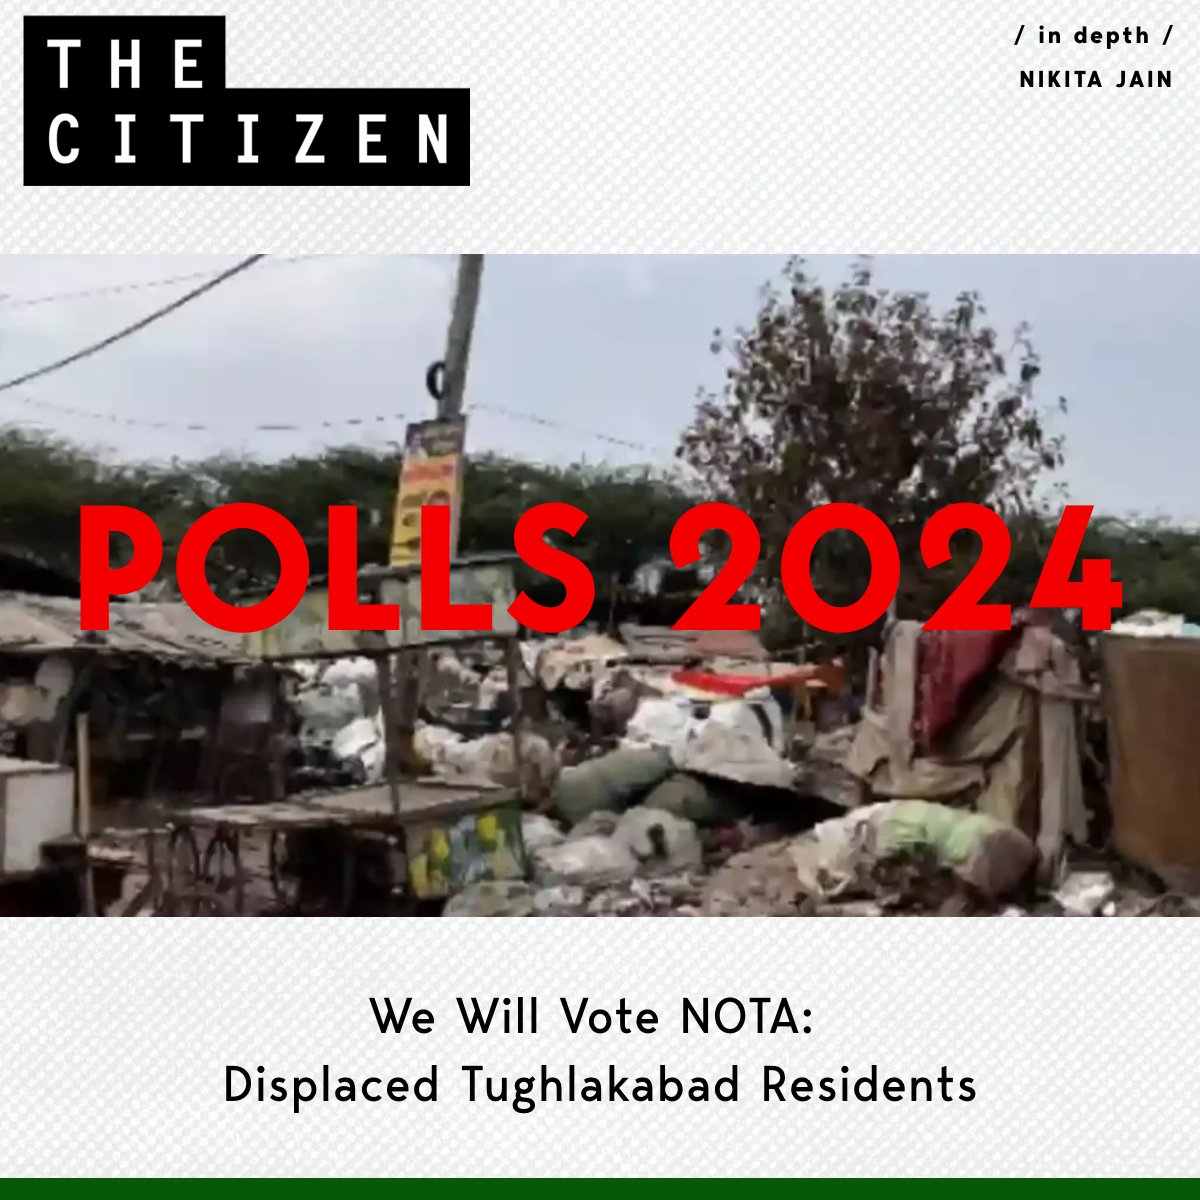 “No hope from any party, will vote for NOTA,” say Delhi residents whose house was demolished, @nikita_jain15 writes: Read the full report here: shorturl.at/eoO69 #Elections2024 #indiavotes #NOTA